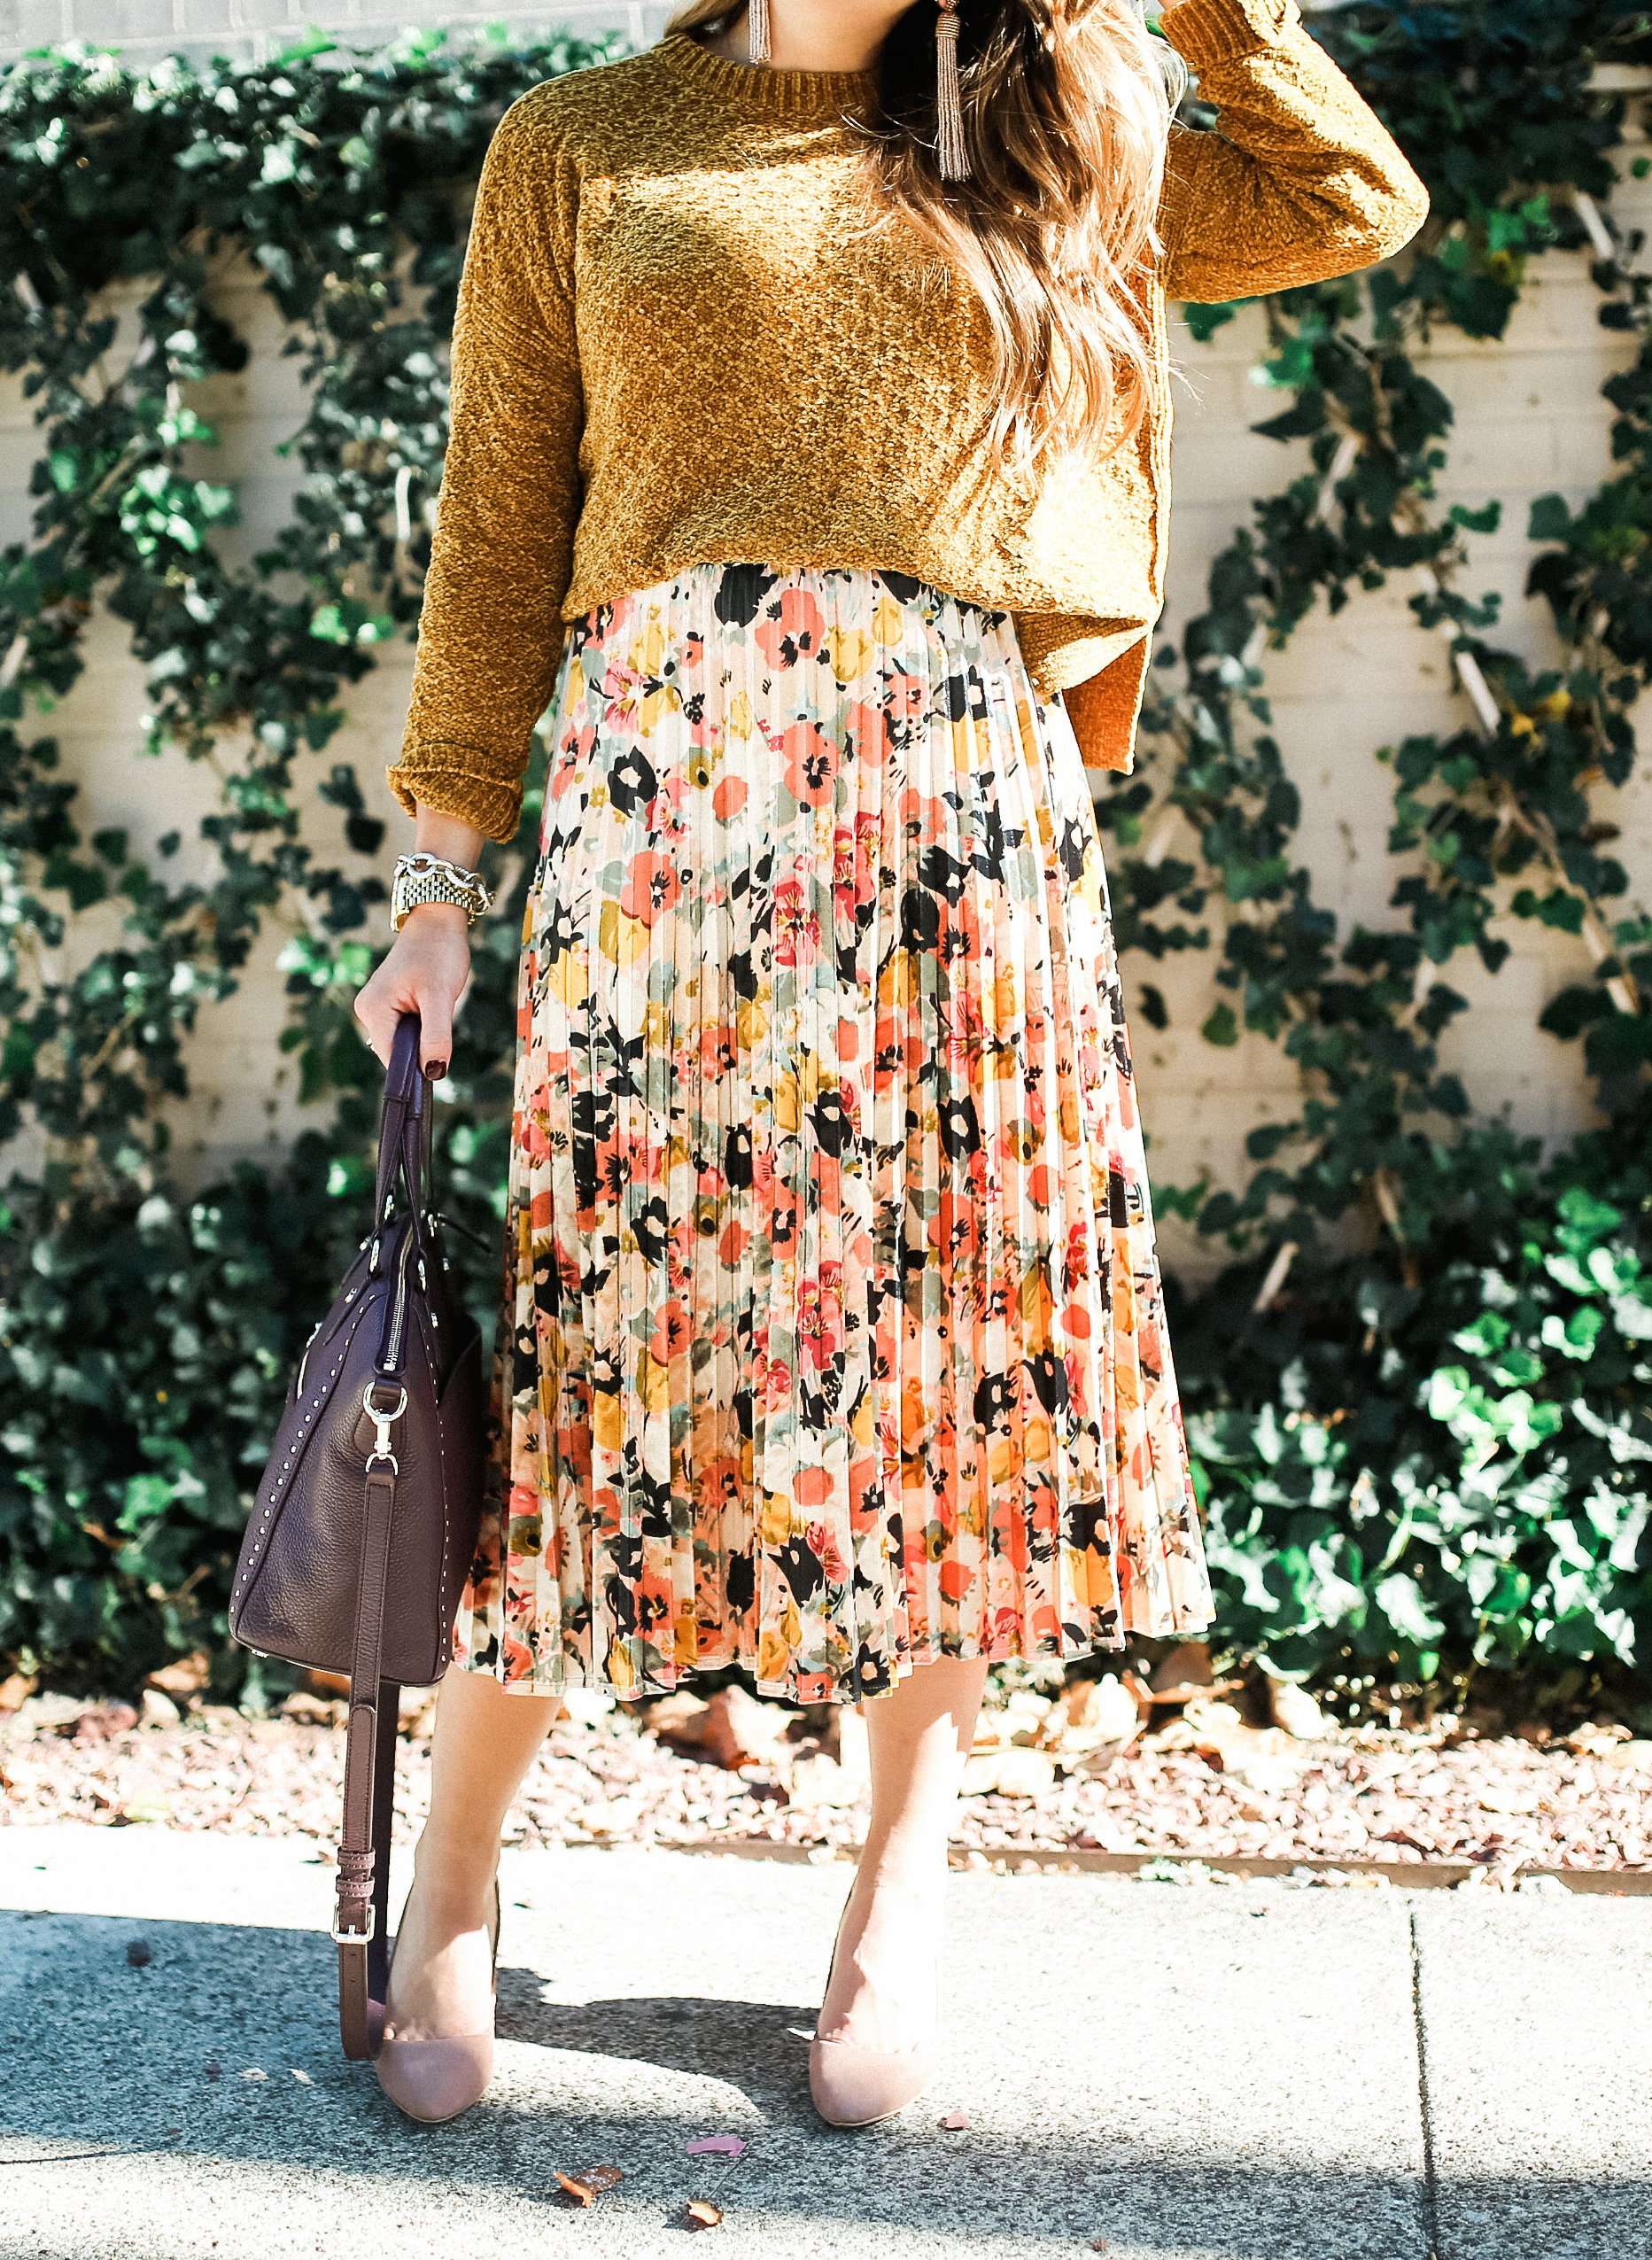 How to Style a Floral Skirt, Floral Skirt Outfit Ideas & Photos